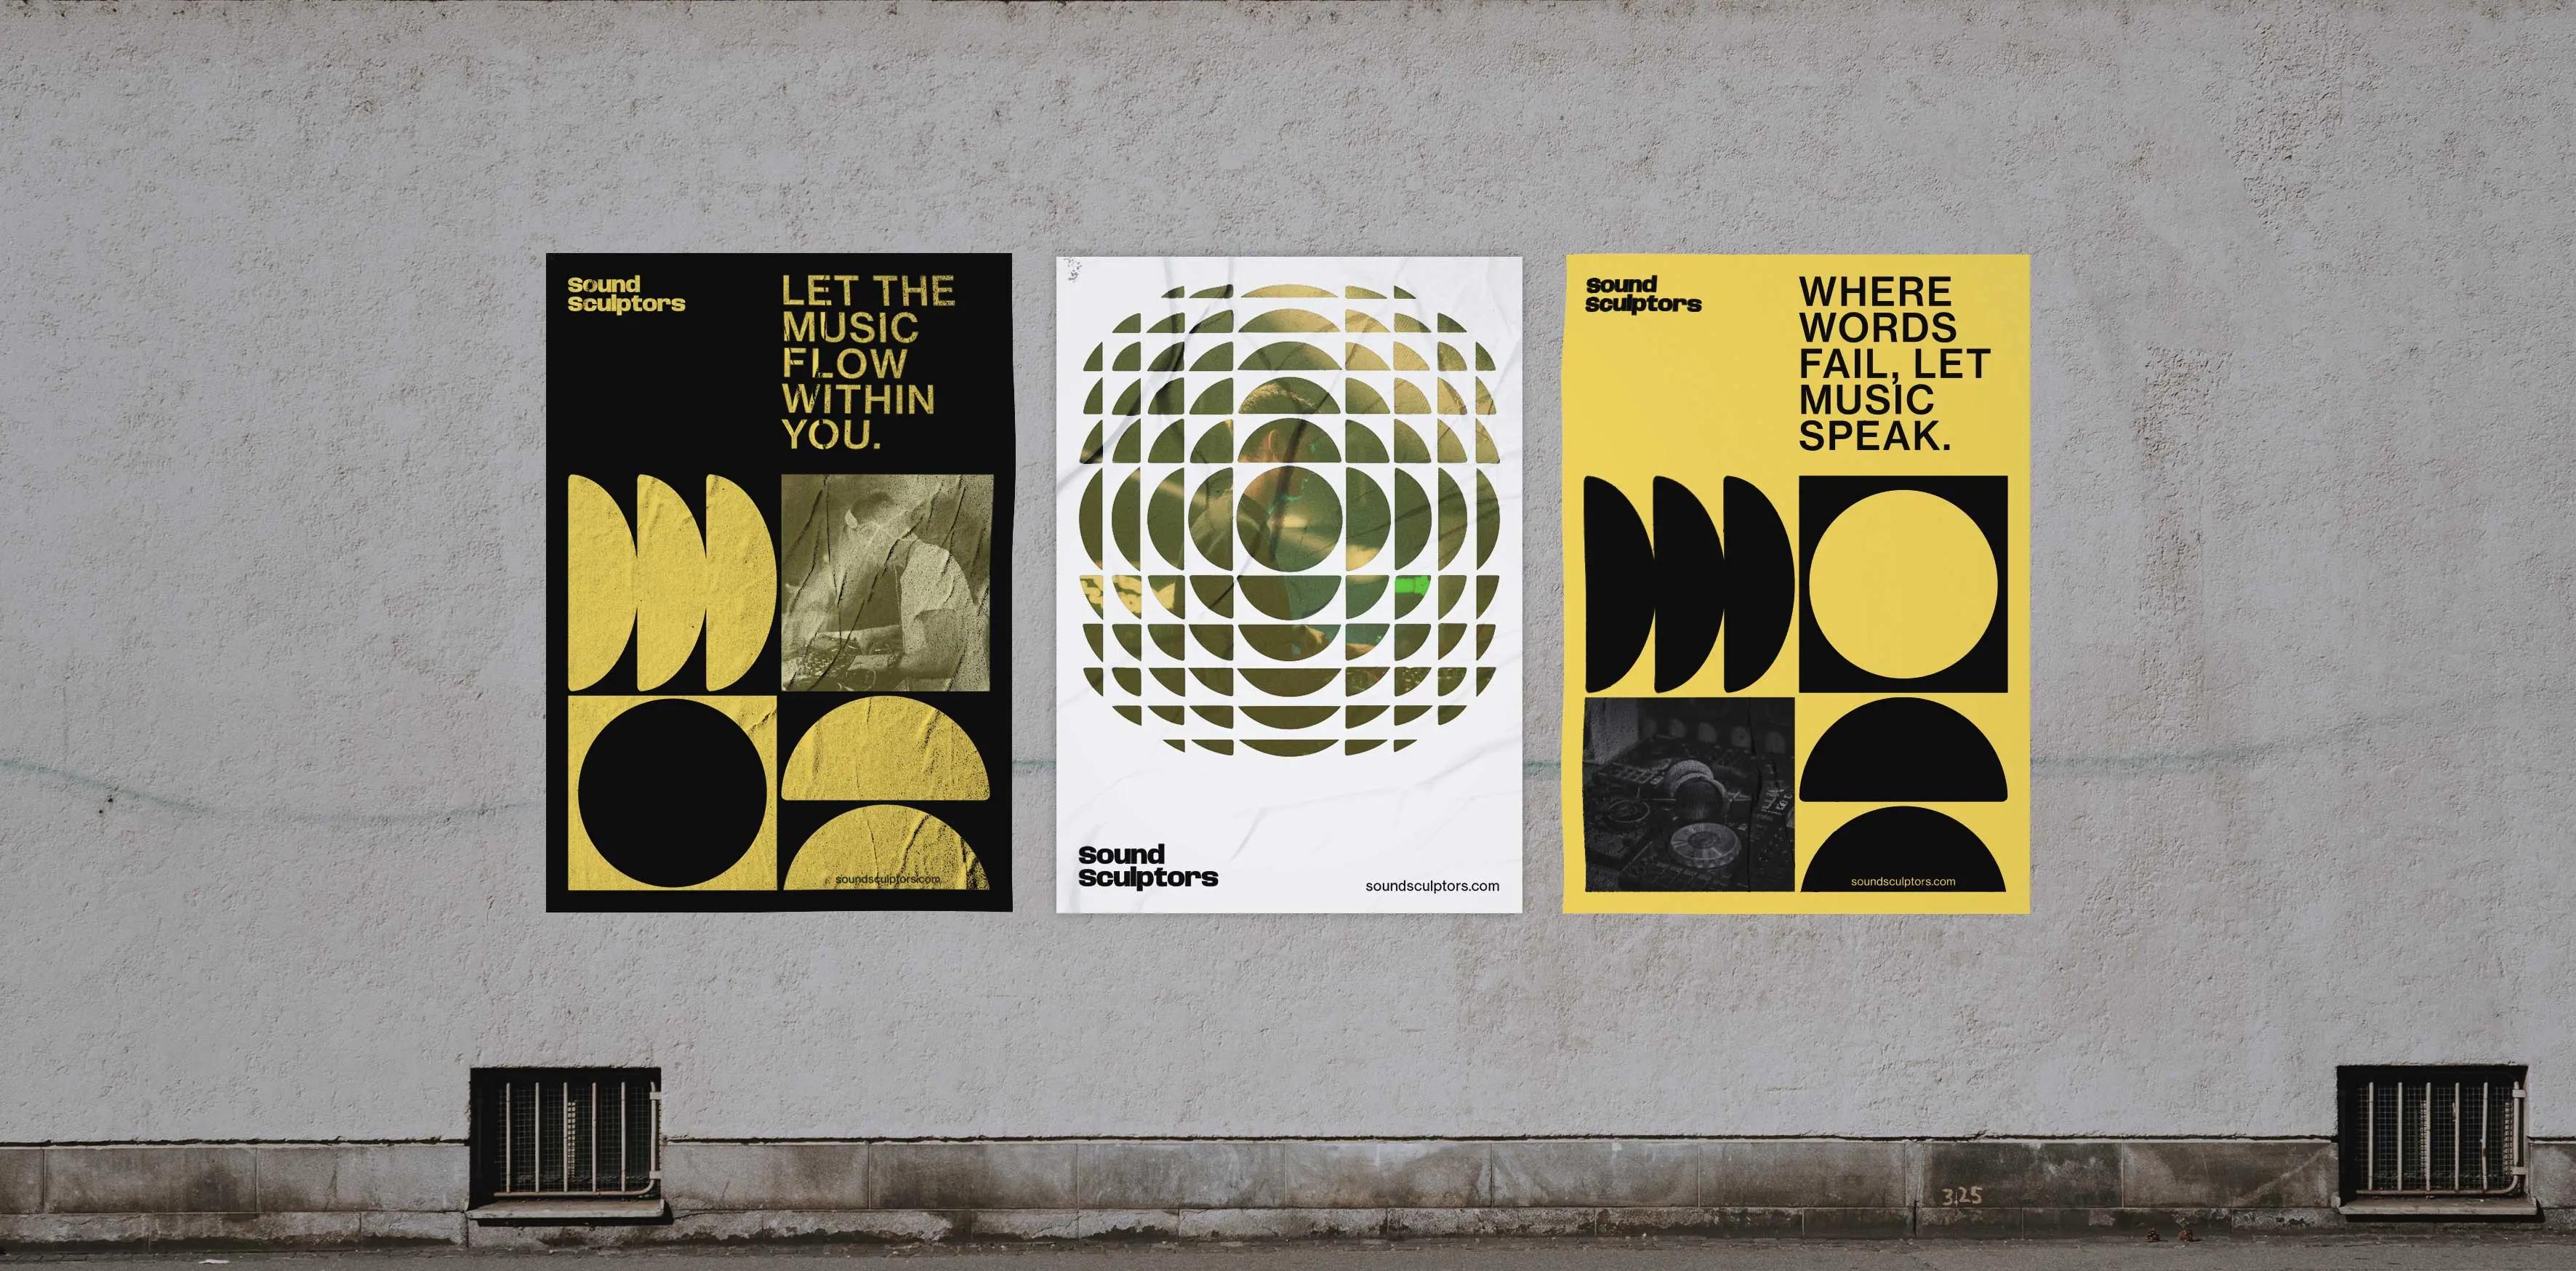 A series of posters designed by me as a Graphic Designer for a school of music